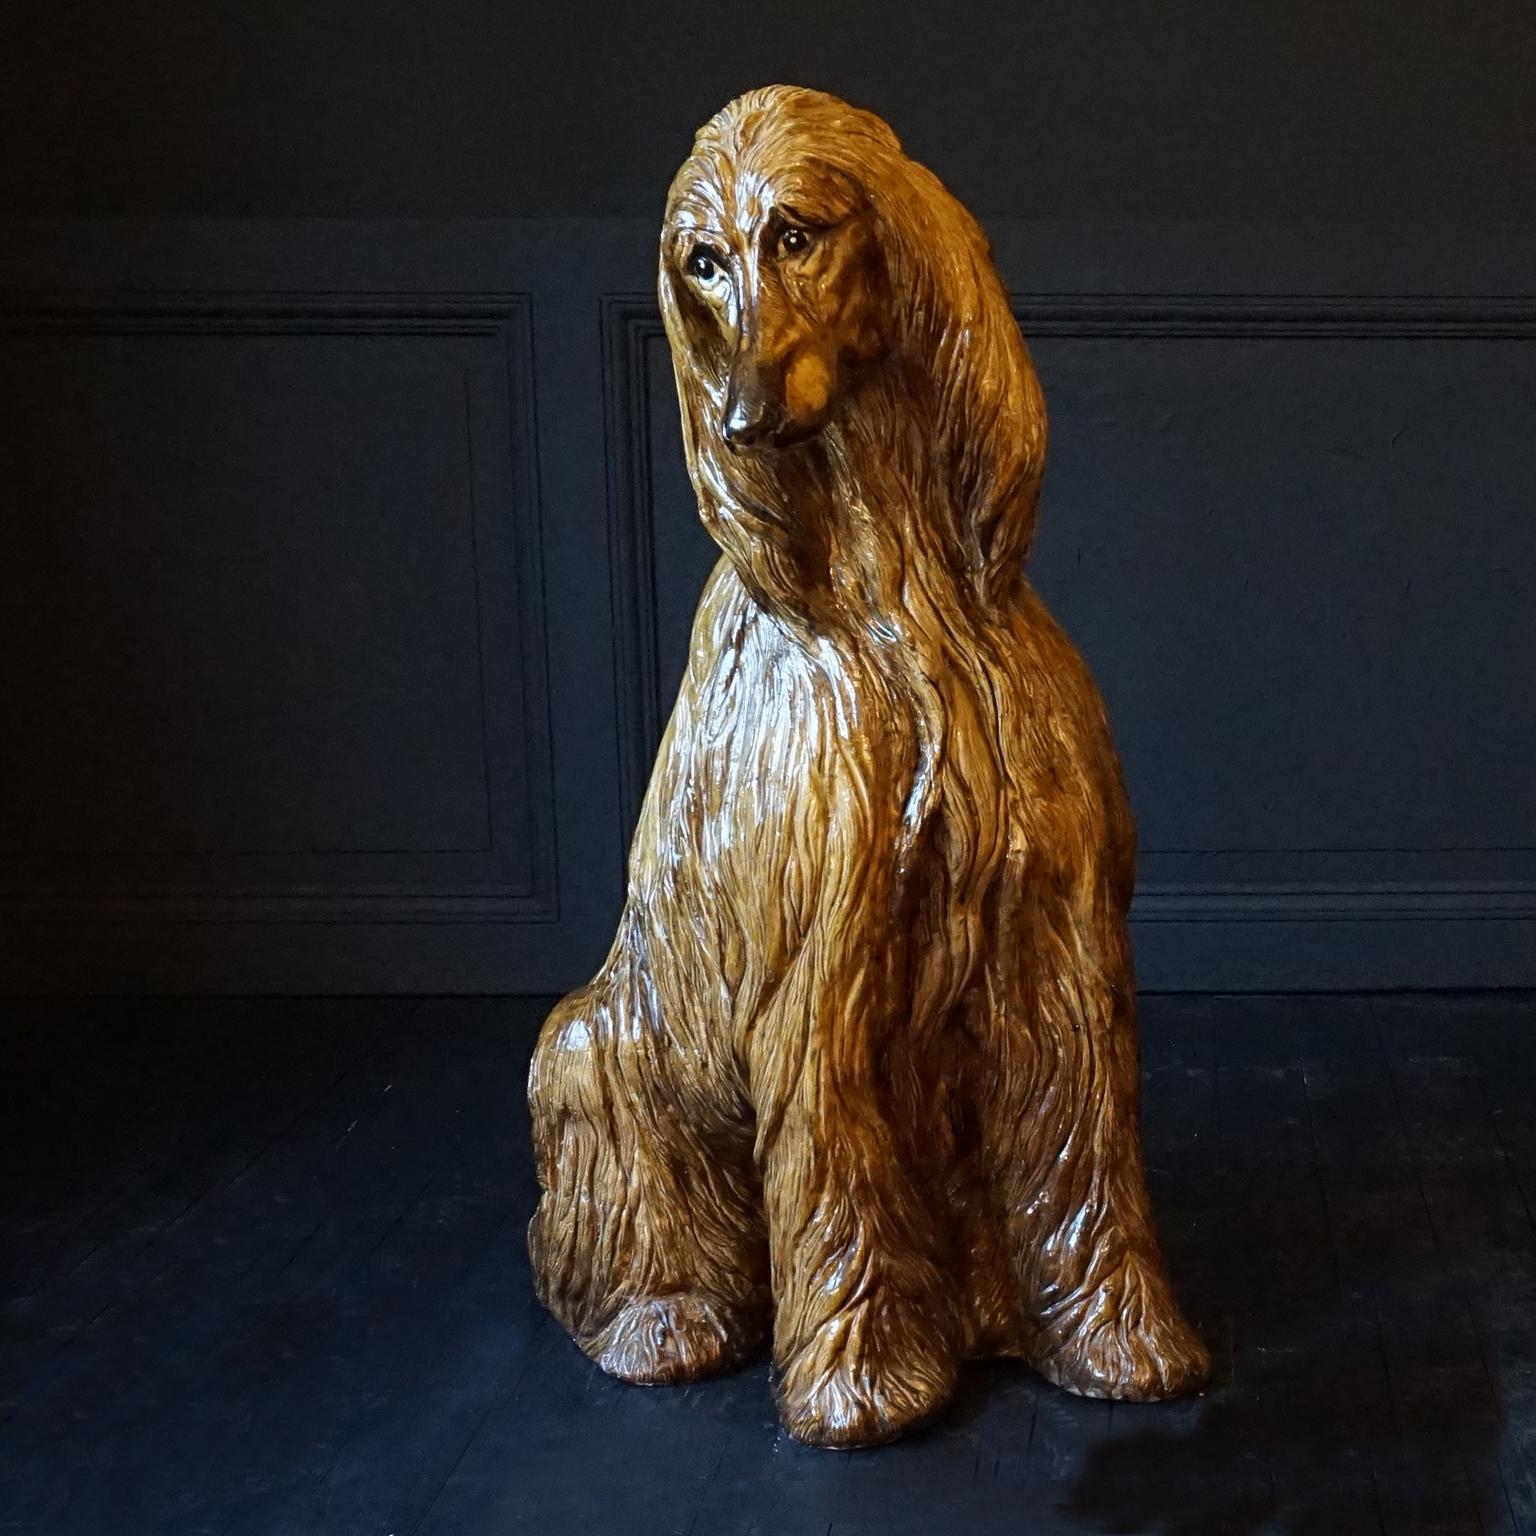 Are you looking for a real eye-catcher in your living room, your hallway or your bedroom?
This life size Italian sitting Afghan hound statue is it.
He is beautifully detailed and hand painted what makes him look very real.

The Afghan Hound is a